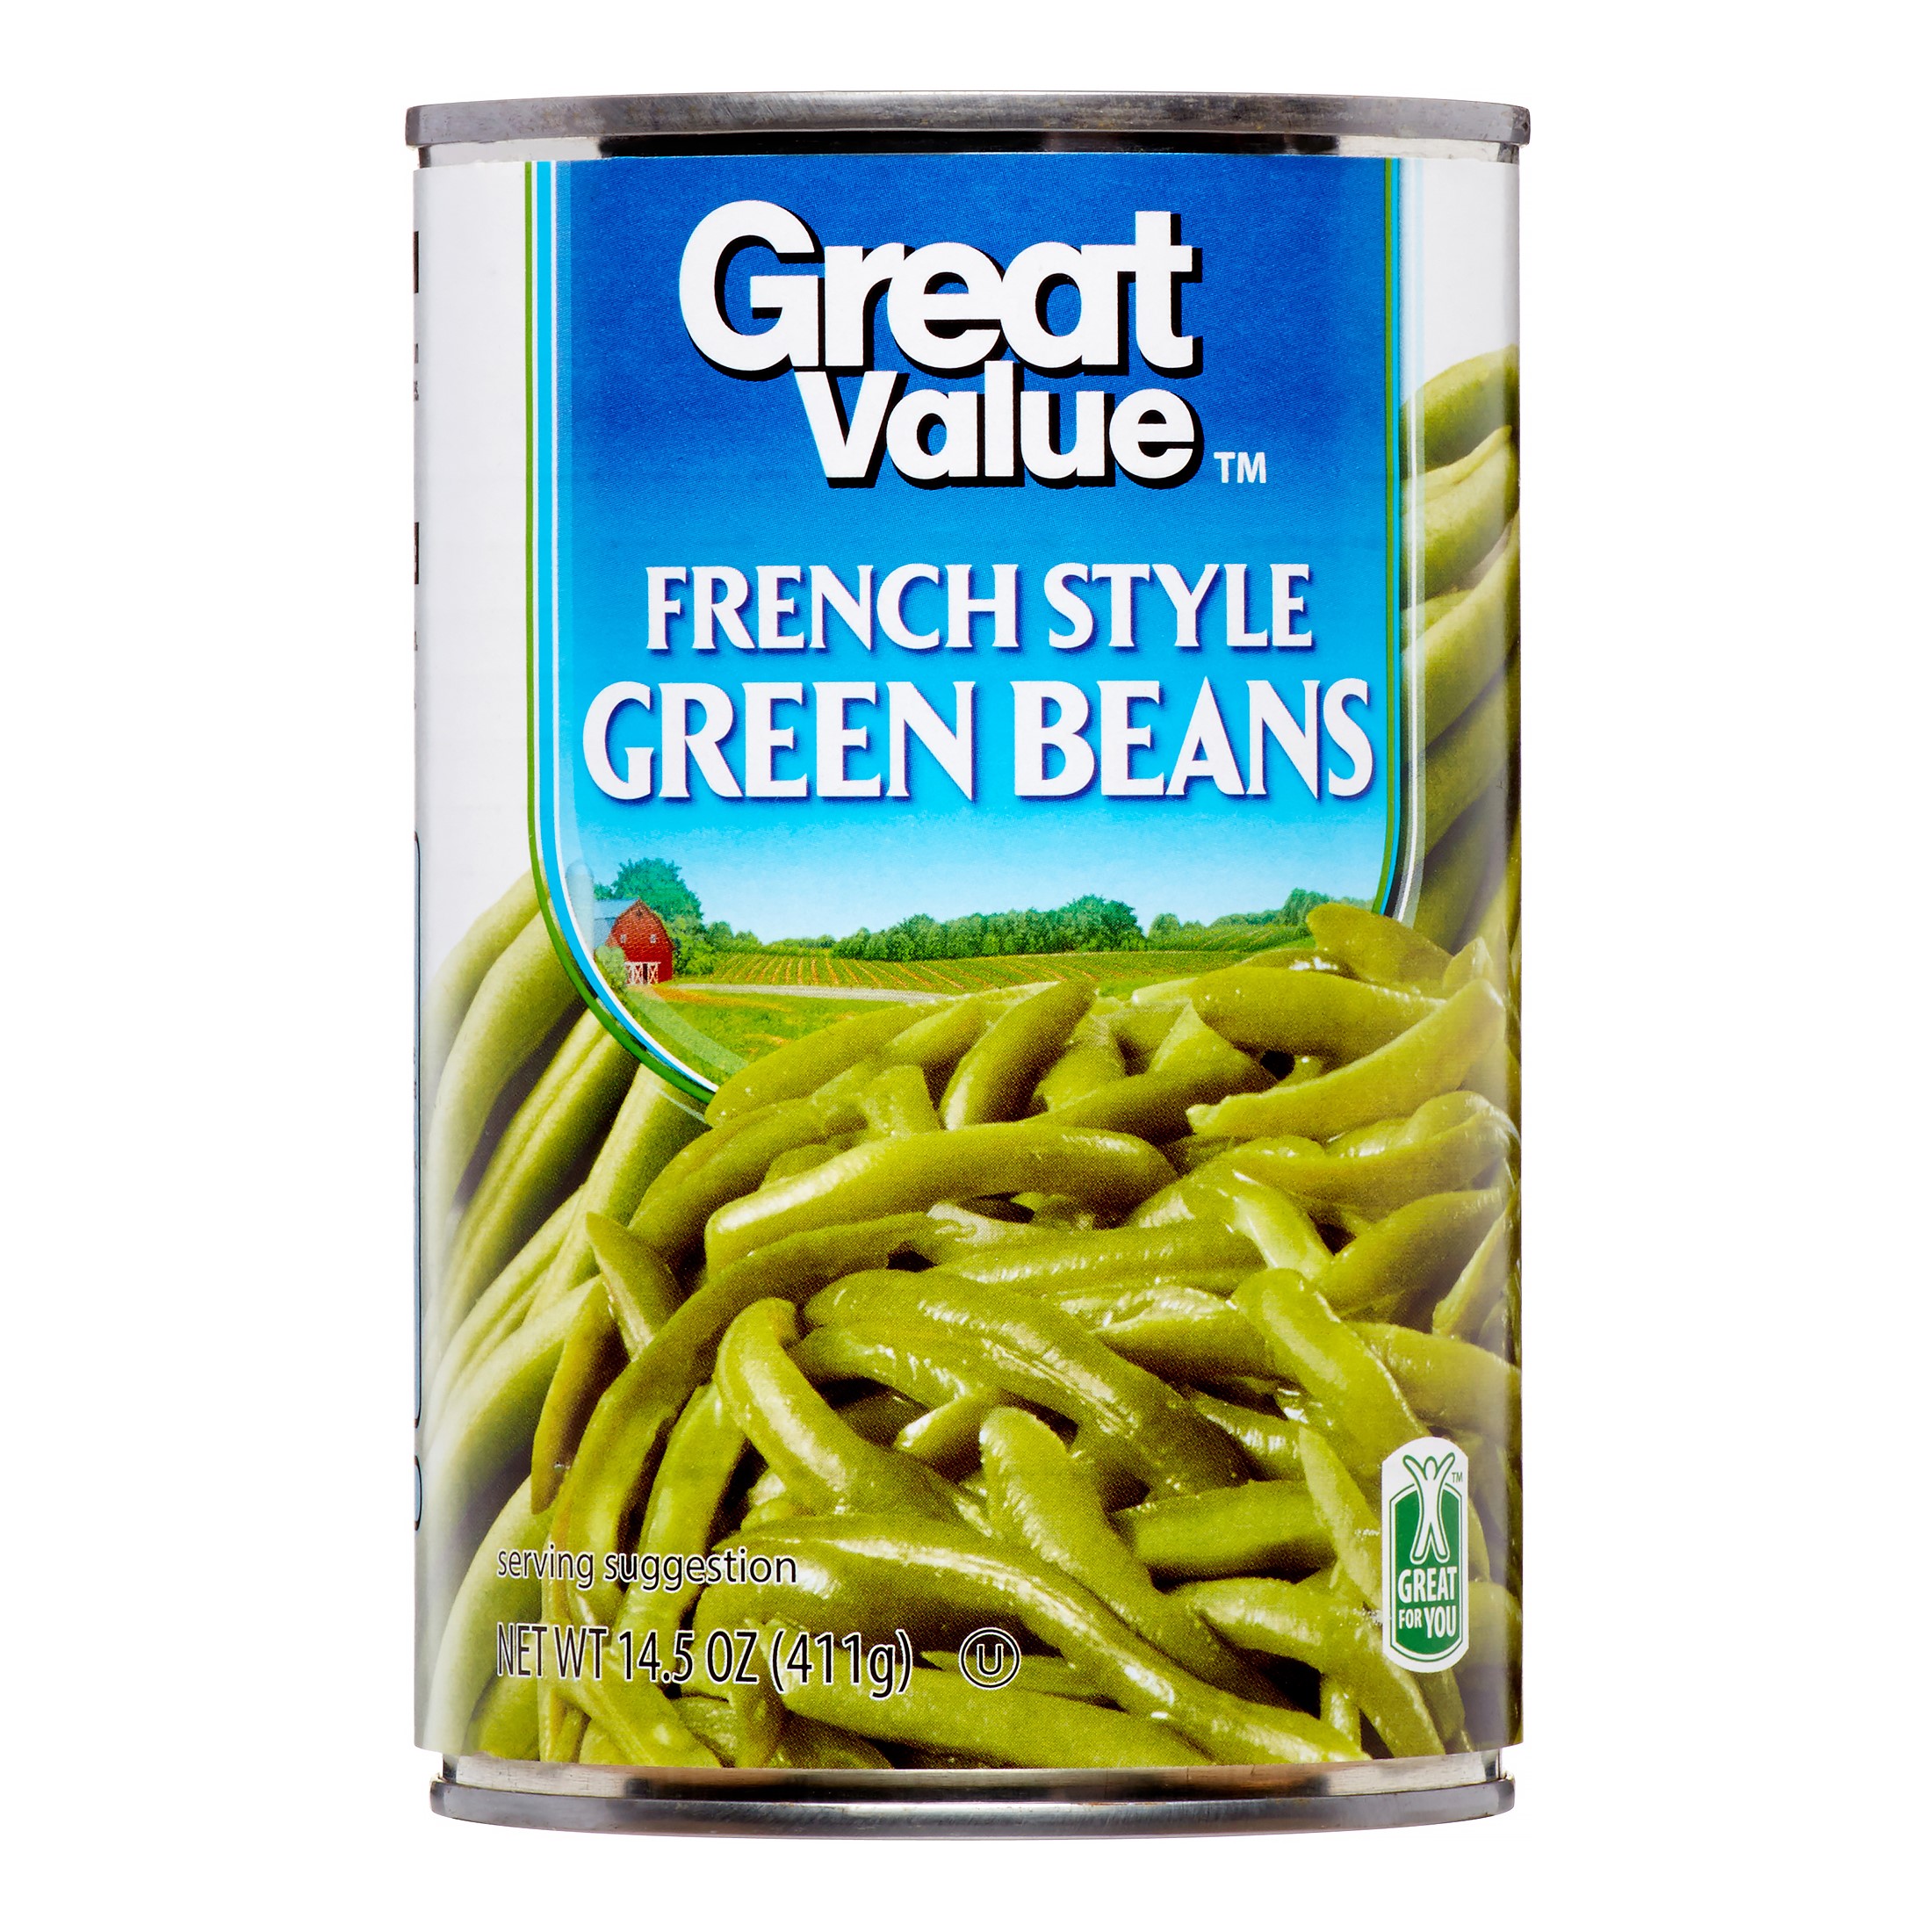 Great Value French Style Green Beans, 14.5 Oz Image